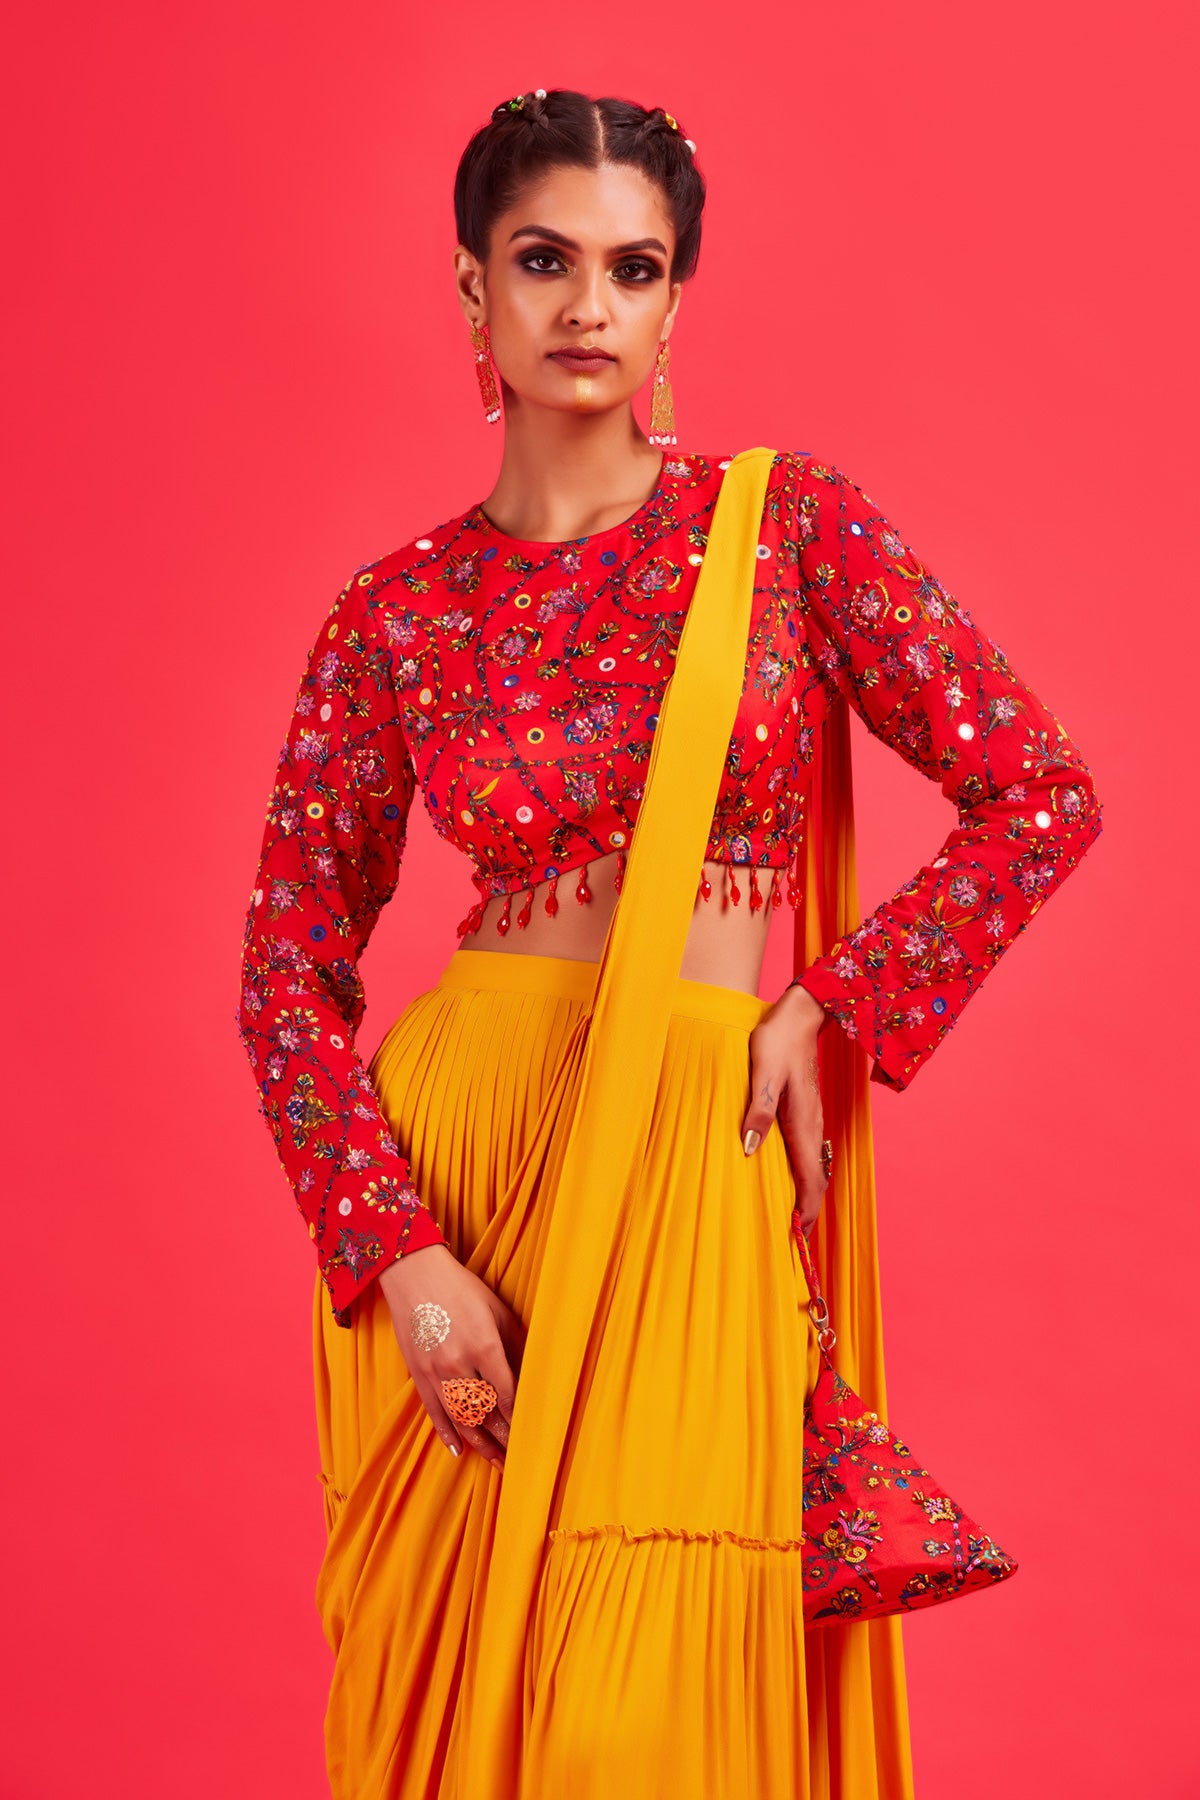 Red Bale Print Blouse With Yellow Tiered Sari & Bag